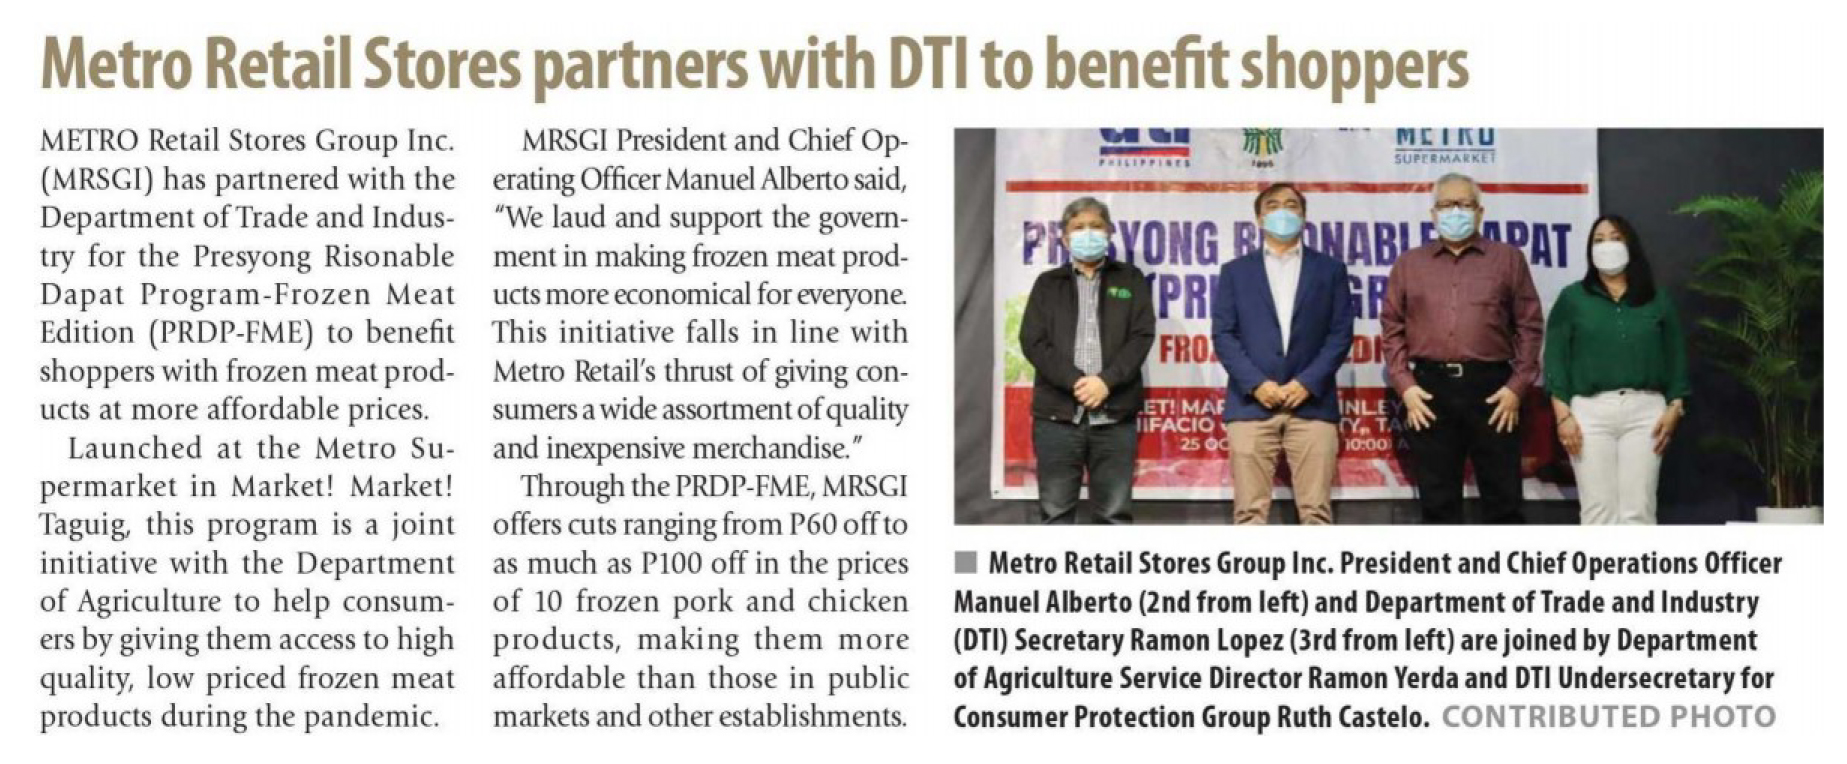 Nov 26 Metro Retail Stores partners with DTI to benefit shoppers Manila Times